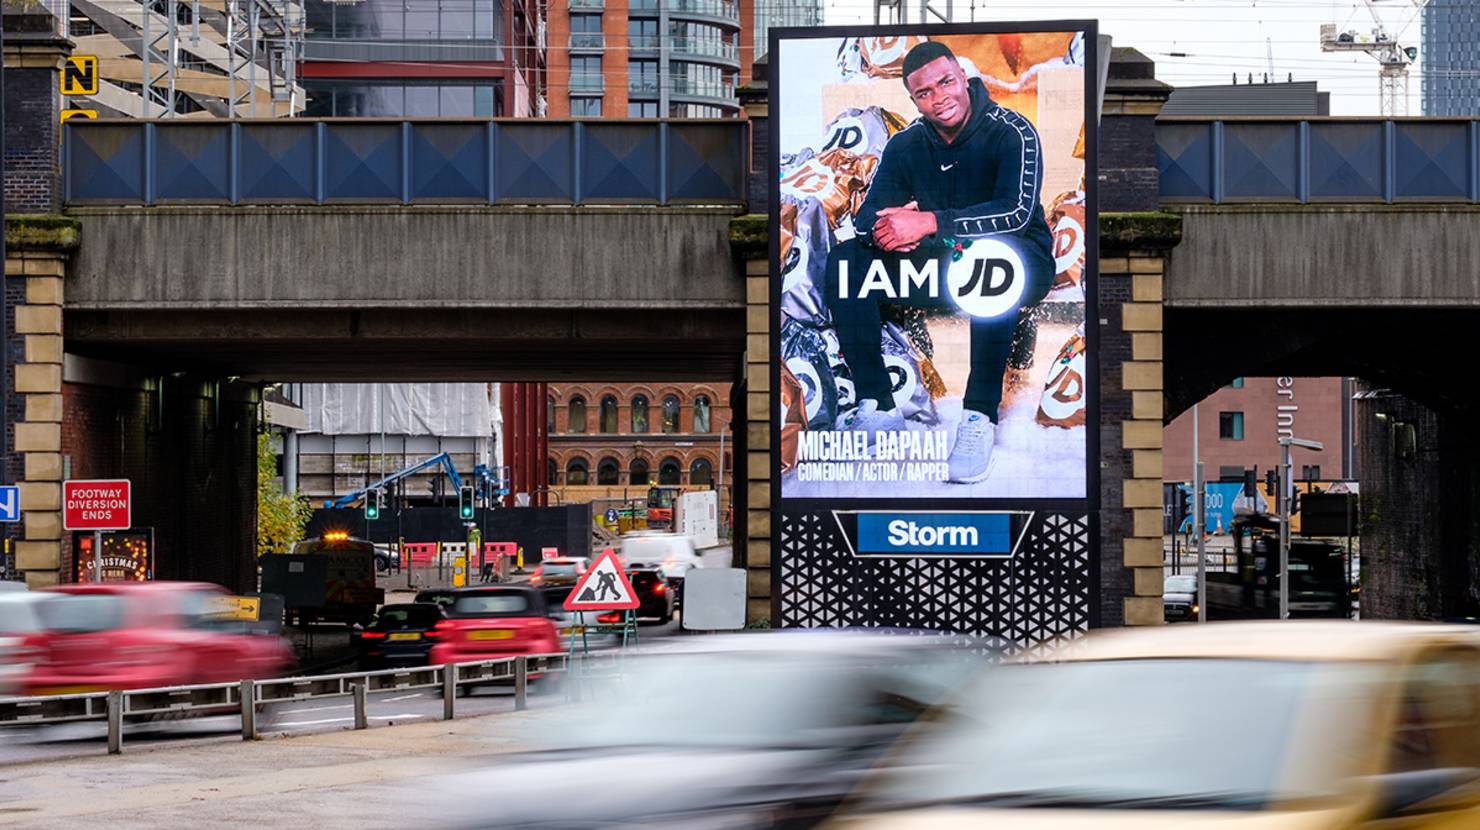 JD Sports Christmas ad featuring Michael Dapaah comedian, actor and rapper on large digital portrait screen